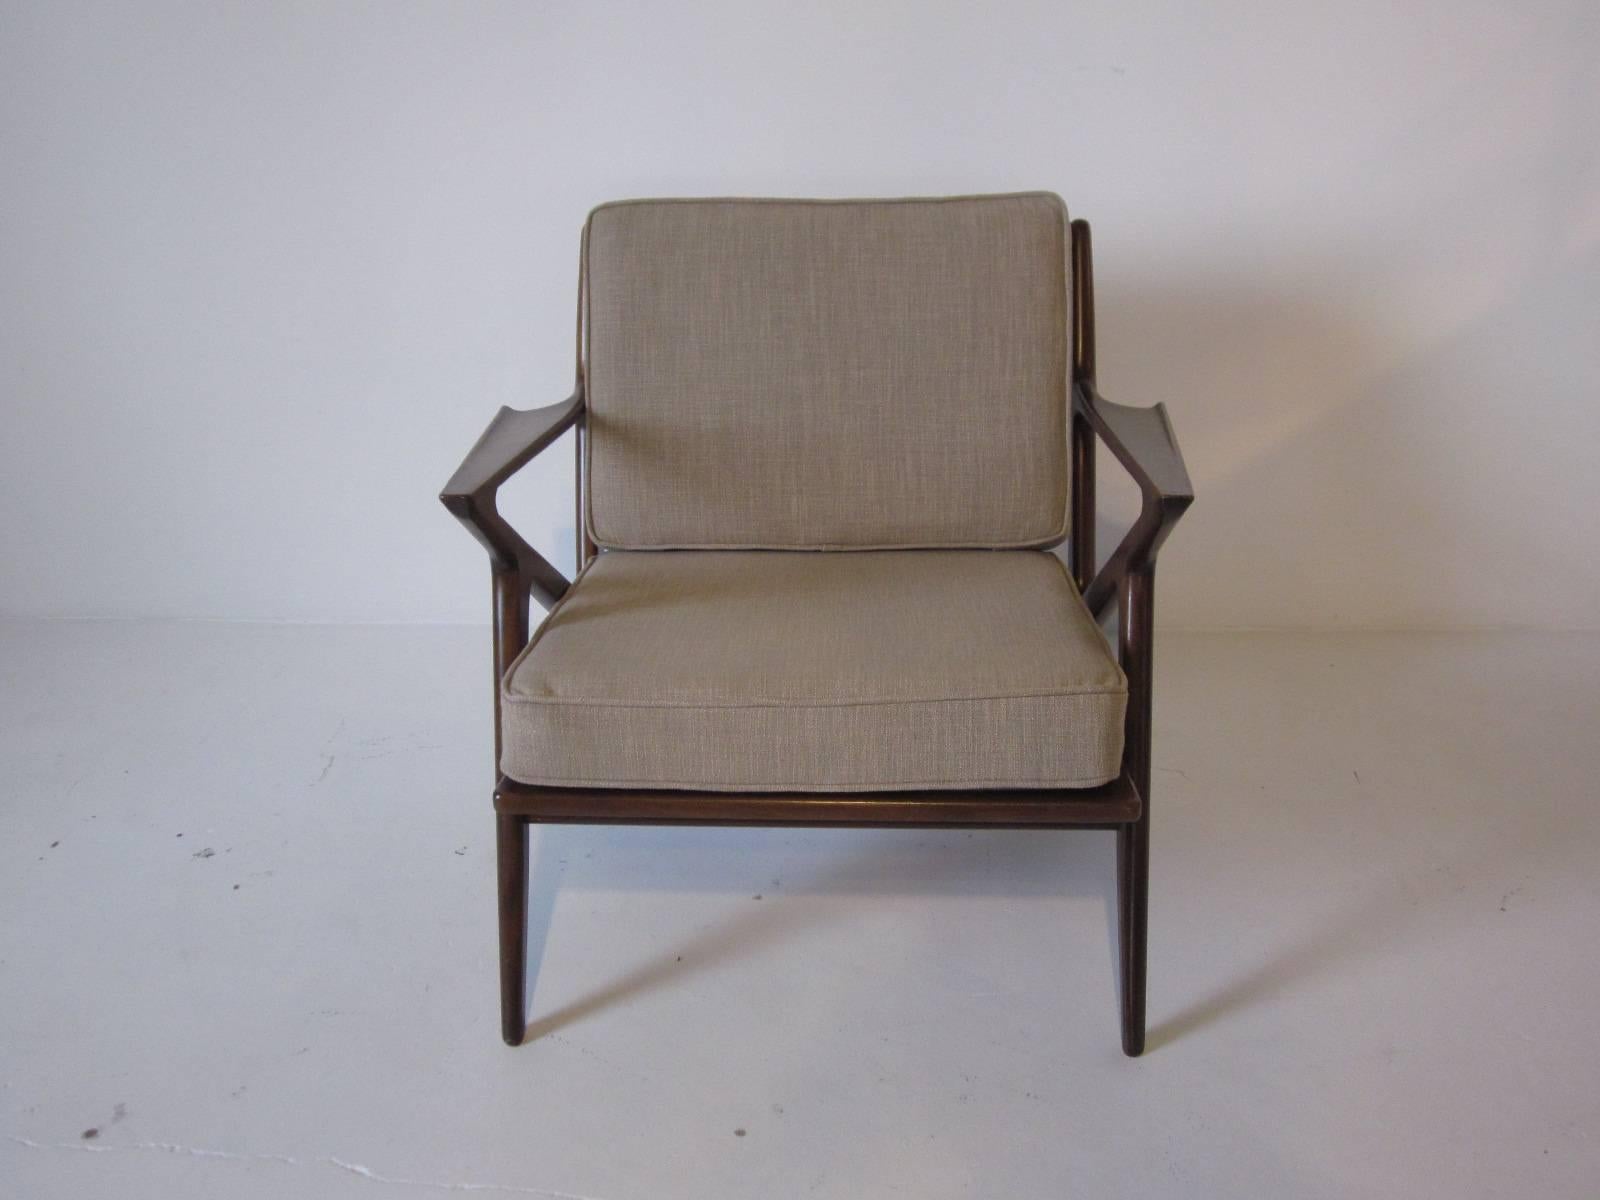 A sculptural wood-framed armchair with loose back and bottom cushion in a dark walnut finish, made in Denmark. Two back supports have been replaced.